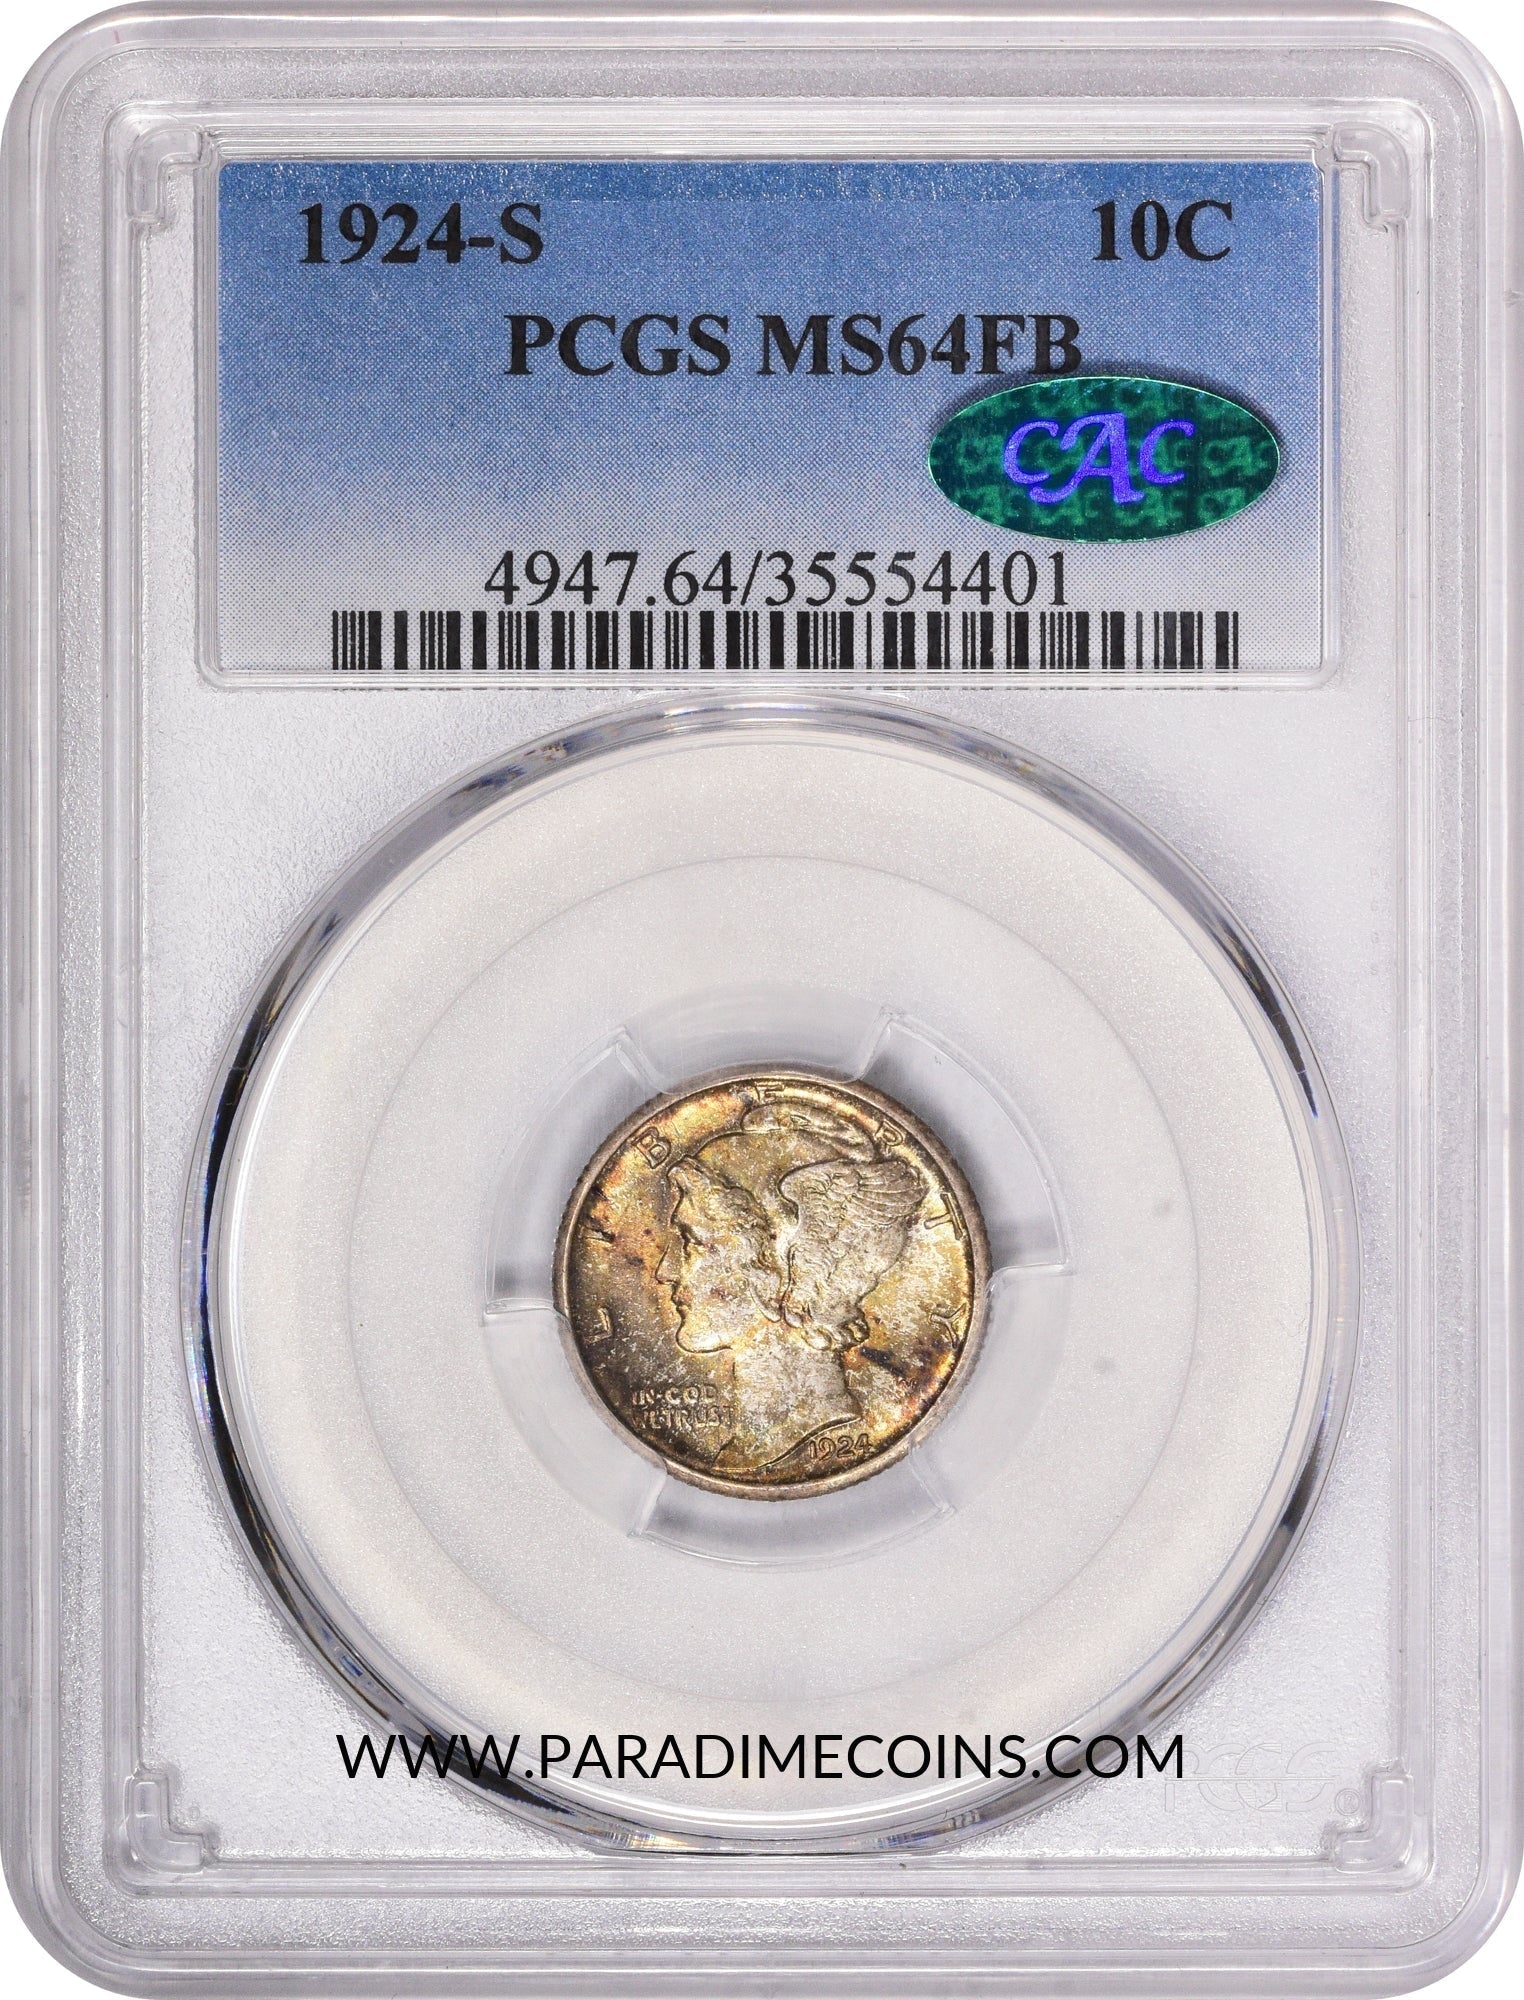 1924-S 10C MS64 FB PCGS CAC - Paradime Coins | PCGS NGC CACG CAC Rare US Numismatic Coins For Sale